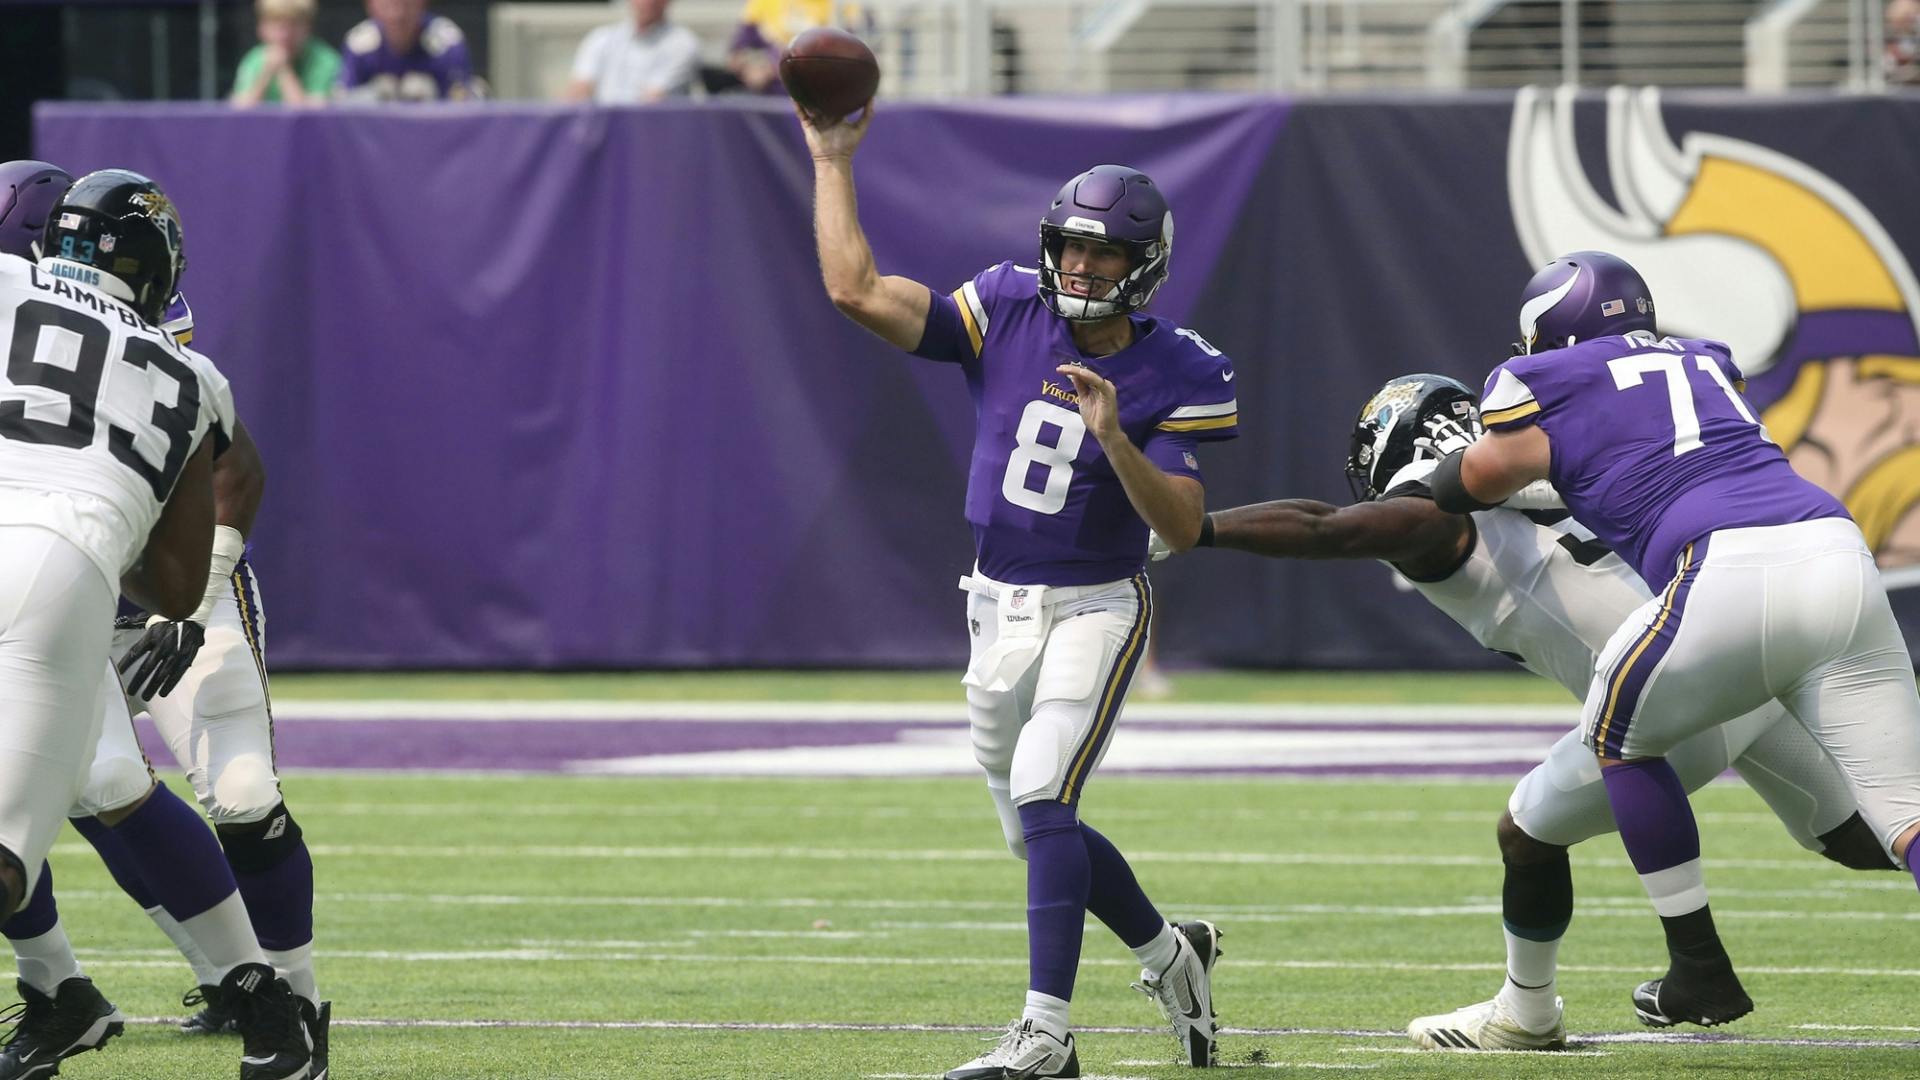 Vikings quarterback Kirk Cousins came off as being hopeful rather than upset about today's loss to the Jaguars and sees it as an opportunity to improve rather than regress.